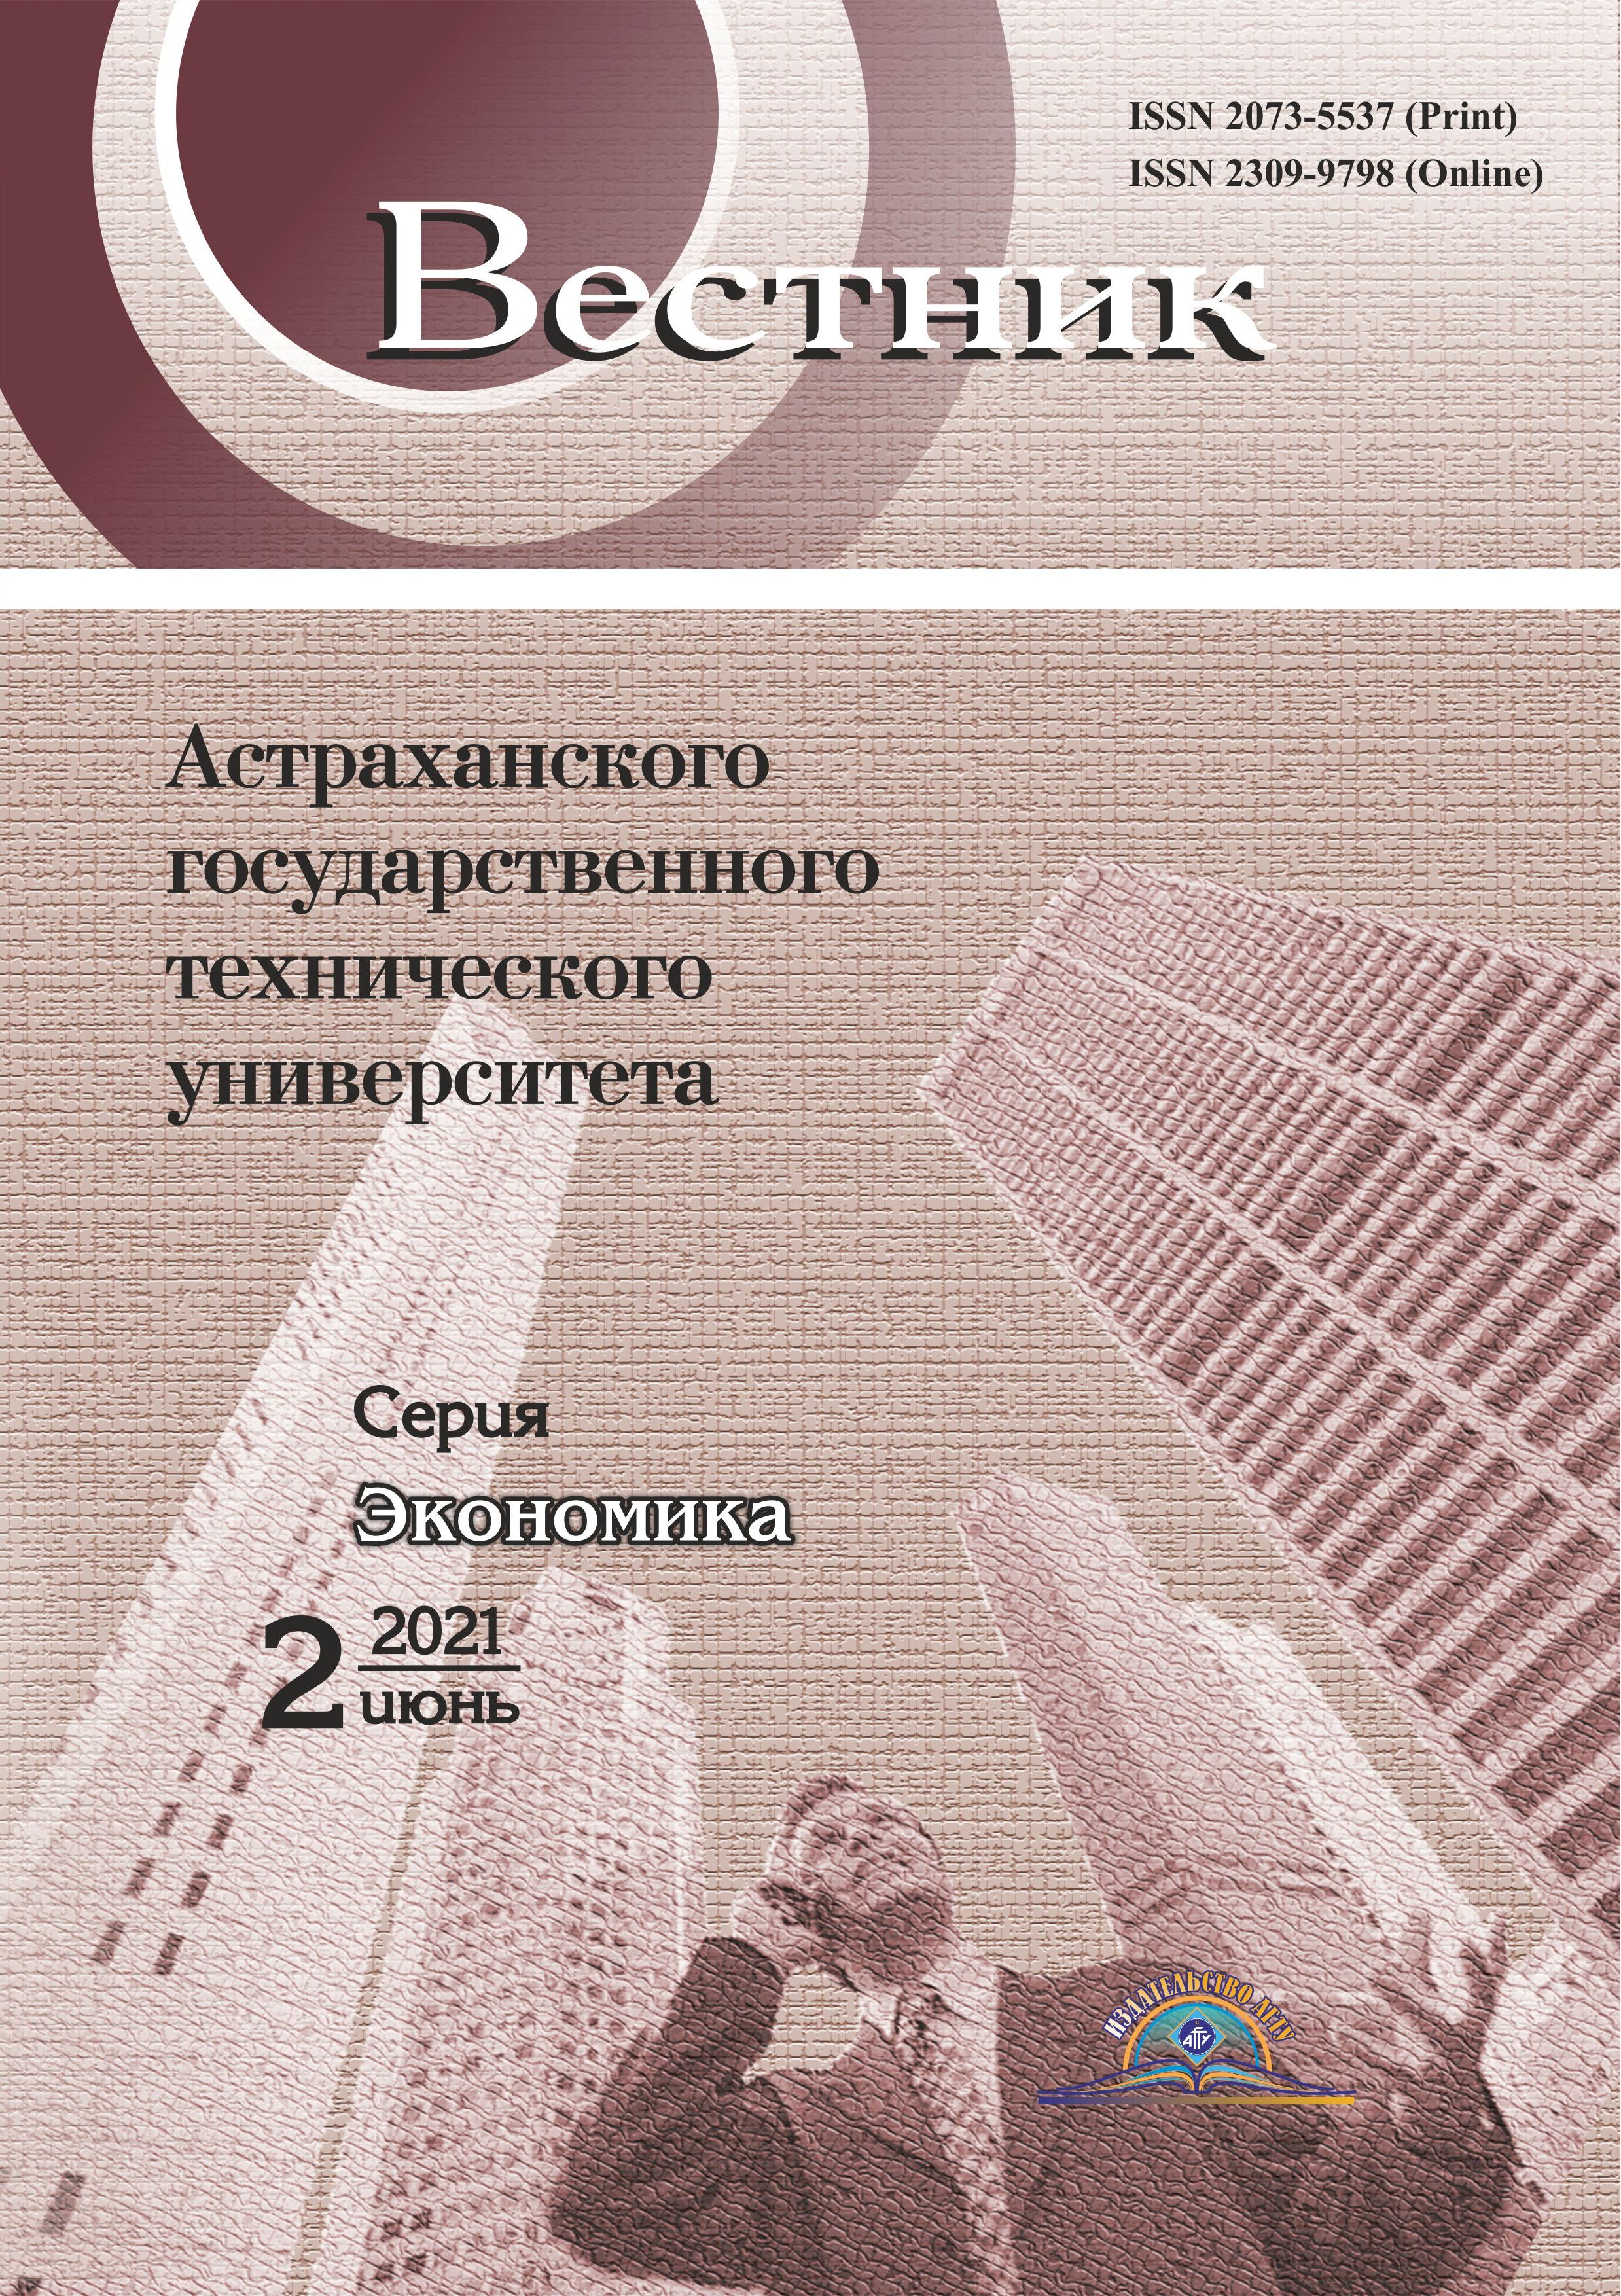                         Economic relations of Russia at supranational level: current state, problems and prospects
            